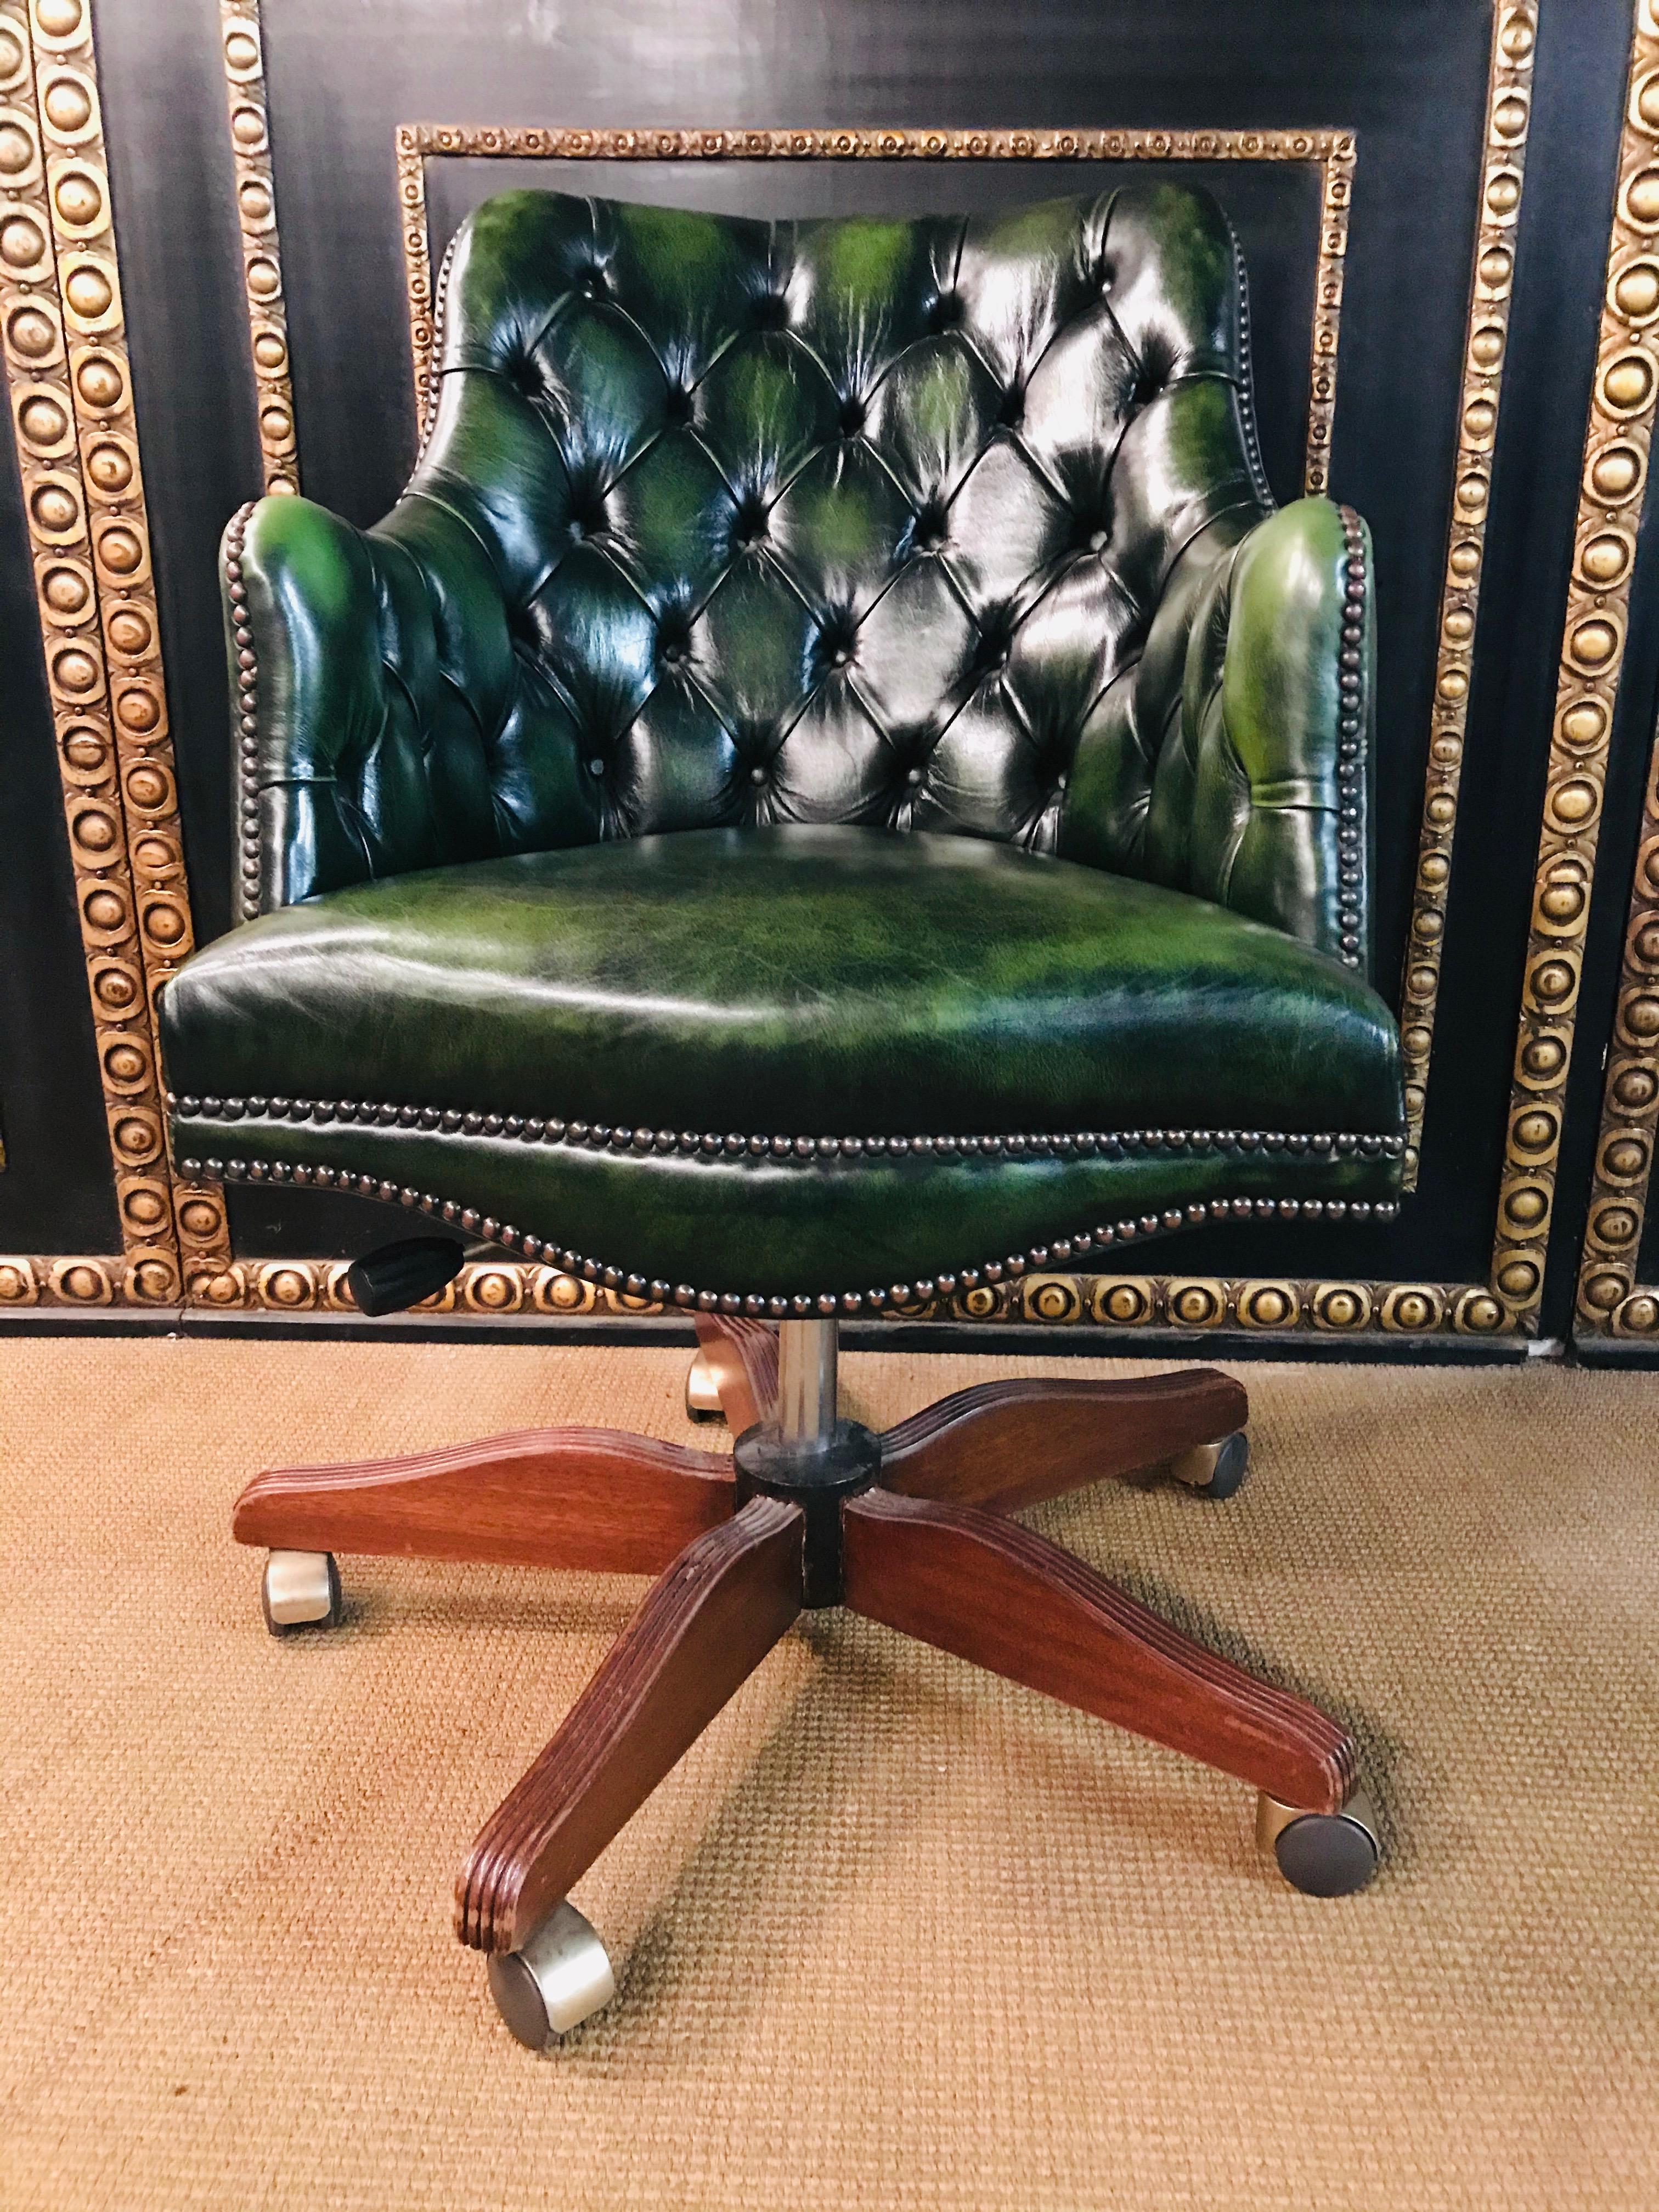 Stunning original handmade in England hand dyed deep green leather captains armchair a stunning piece, the leather is English cattle hide and nice and thick, each panel has been hand.
The leather stripped back then hand dyed this glorious